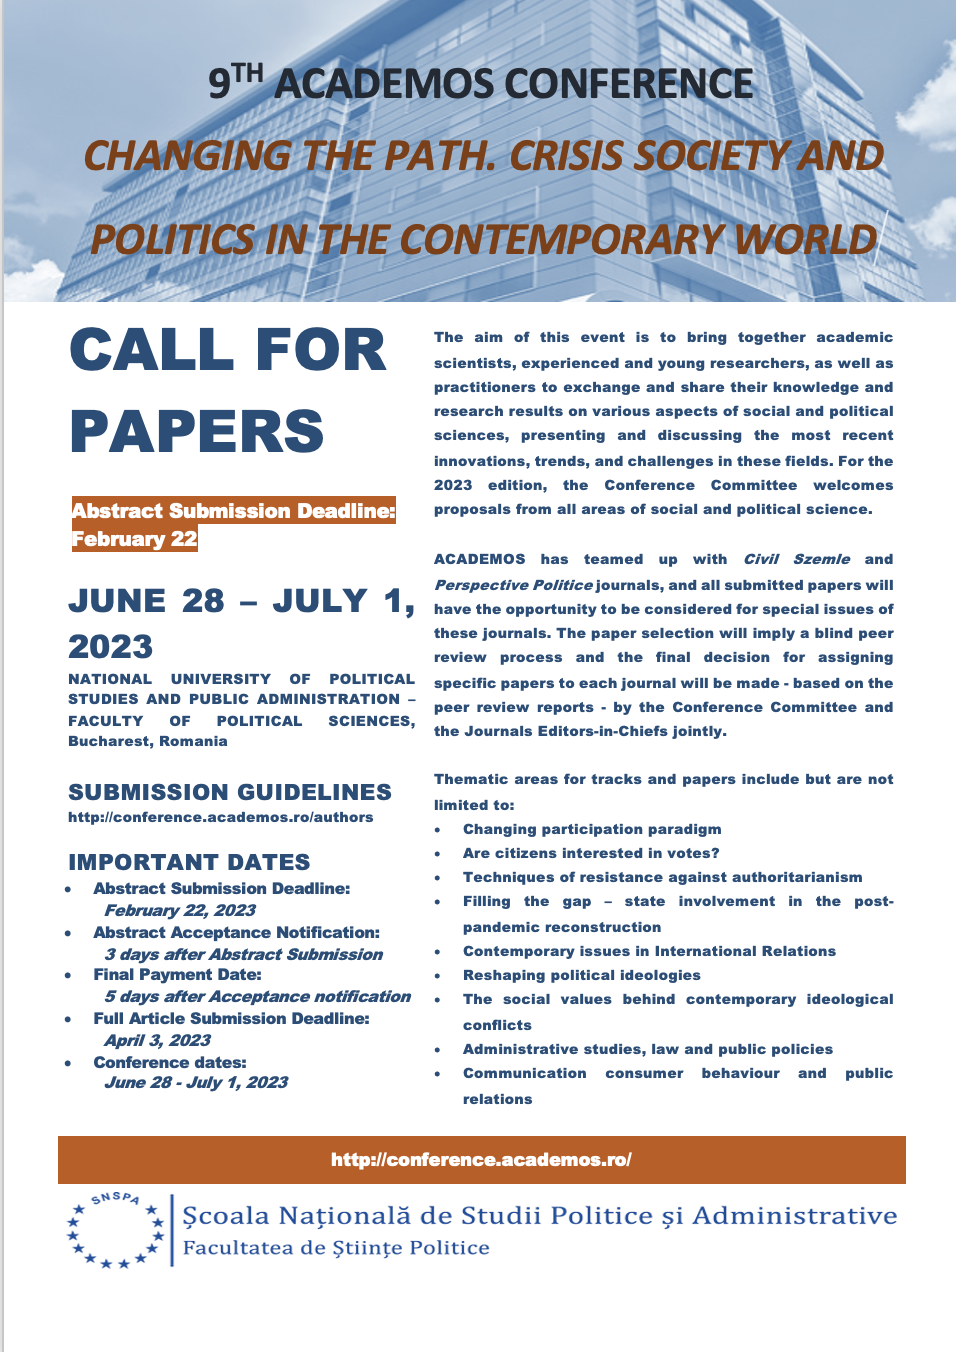 Call for papers – 9th ACADEMOS Conference “Changing the path. Crisis society and politics in the contemporary world”